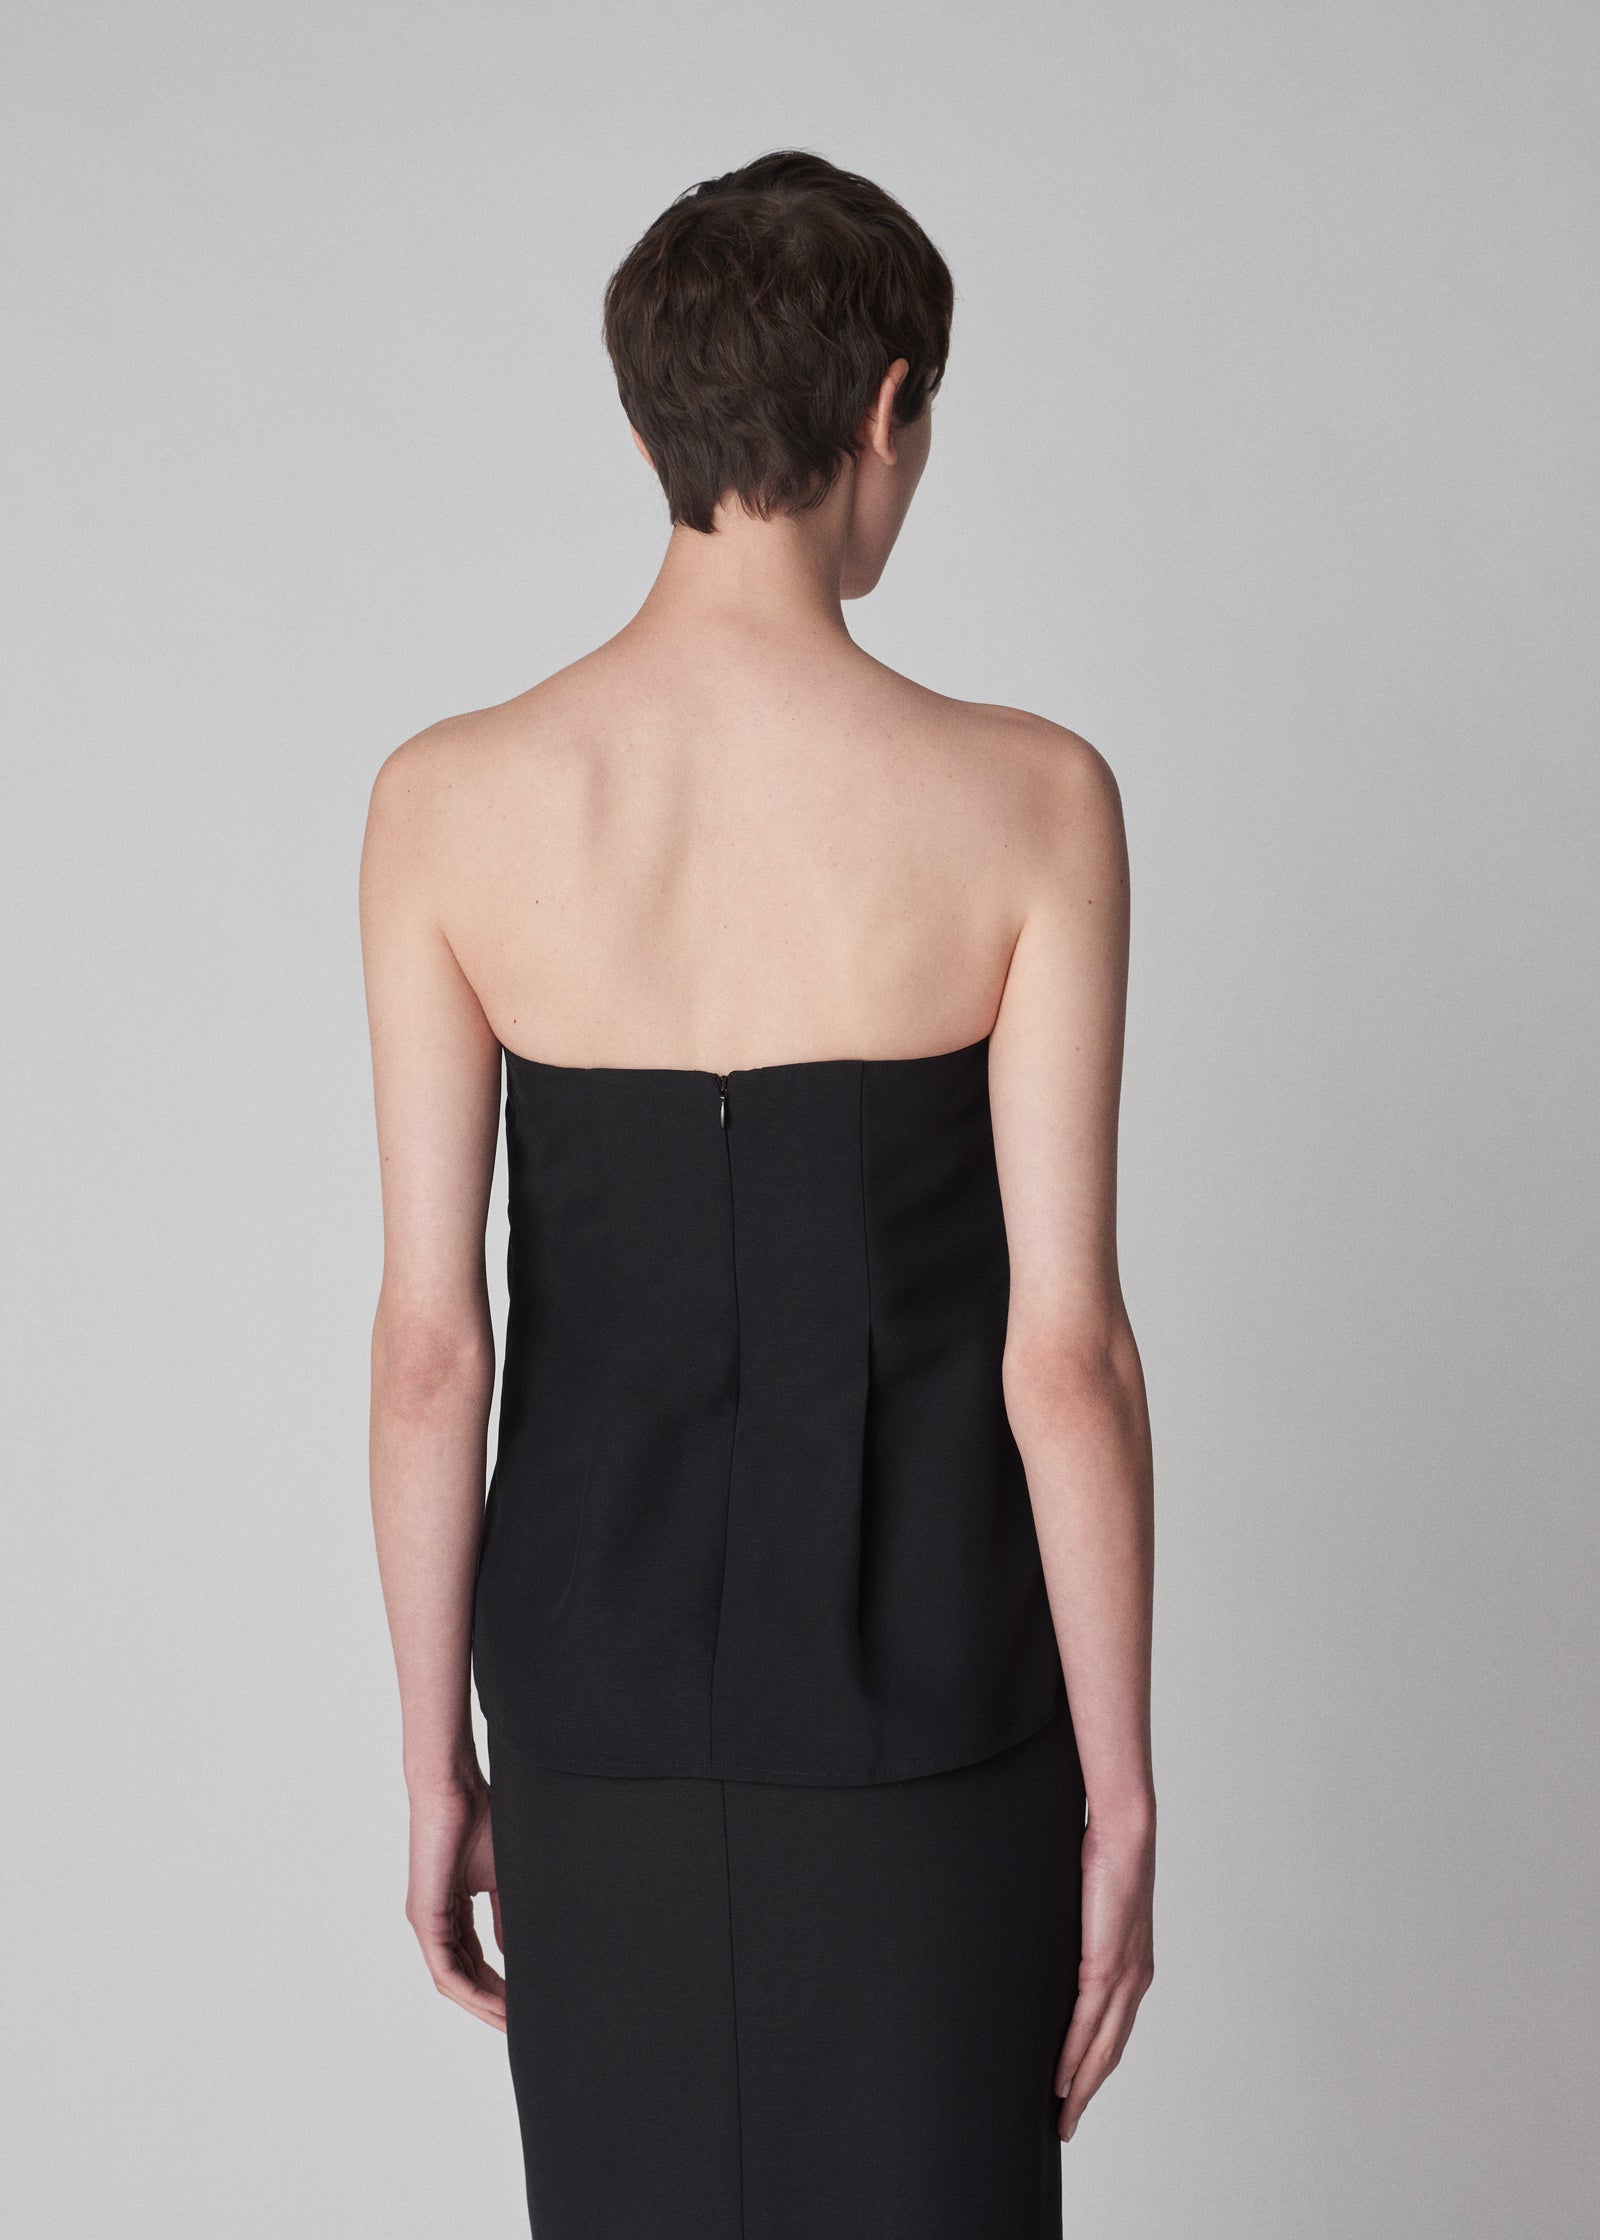 Bustier Top in Smooth Faille - Black - CO Collections